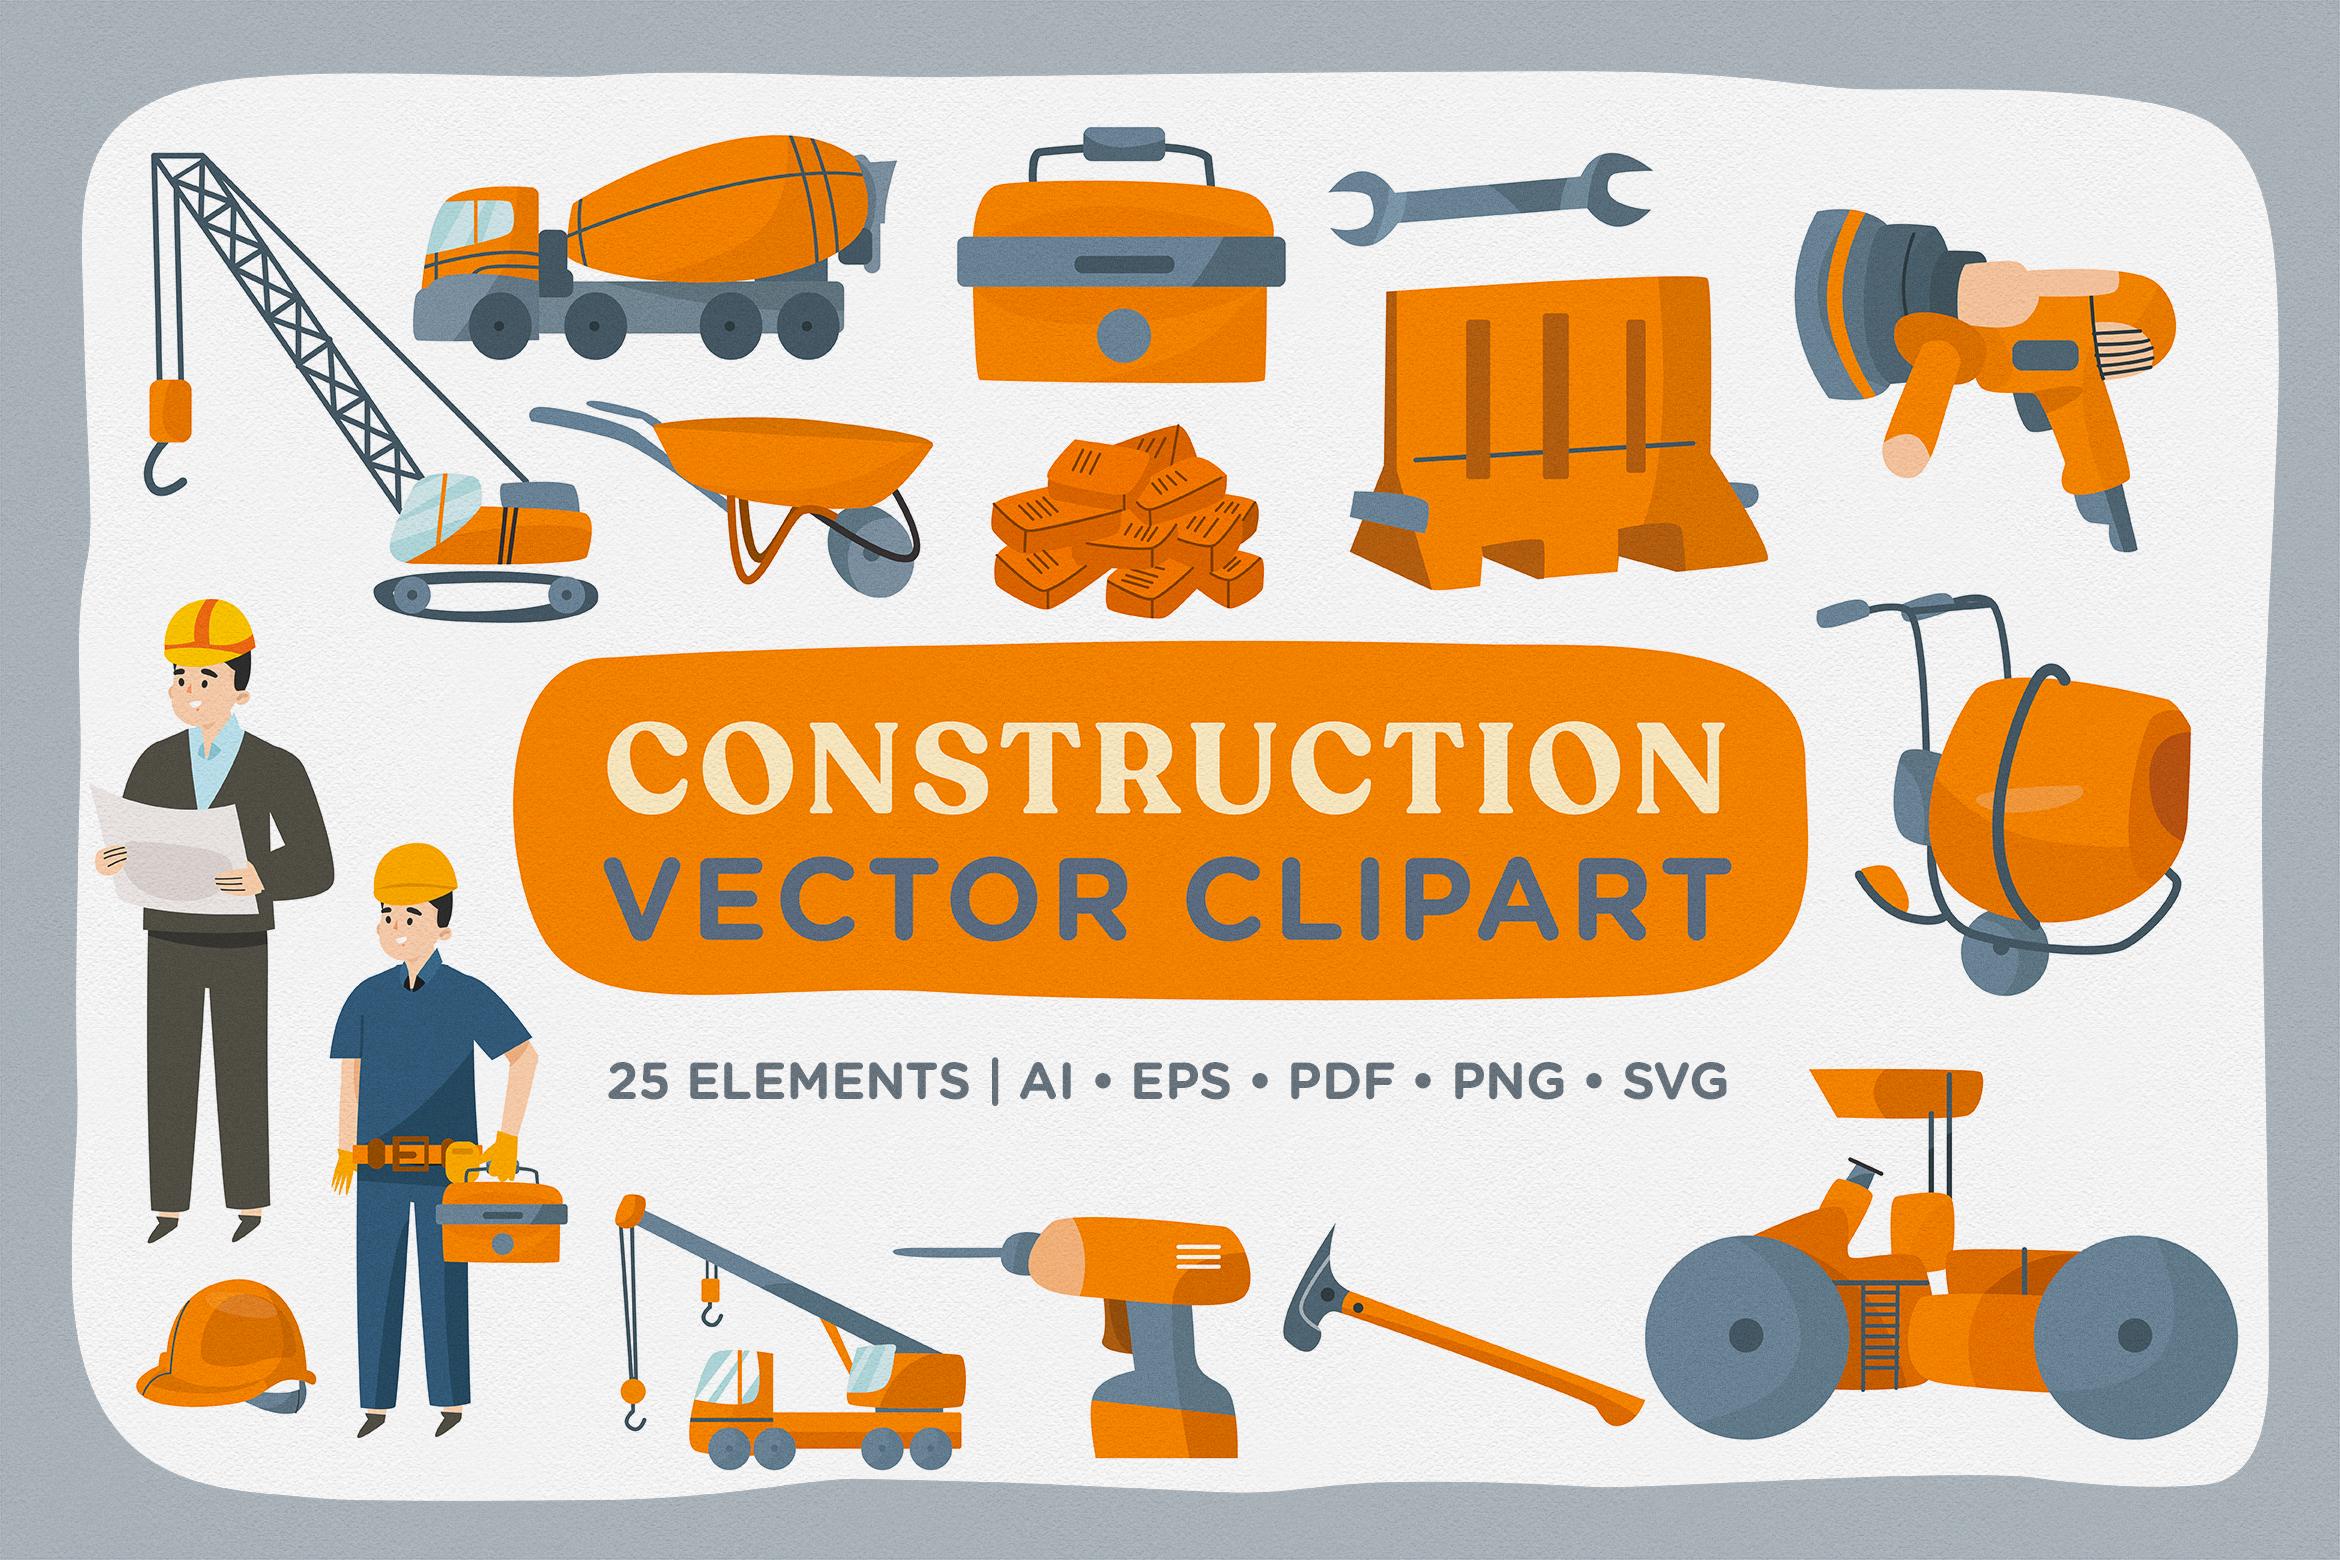 Cute Construction Vector Clipart Pack